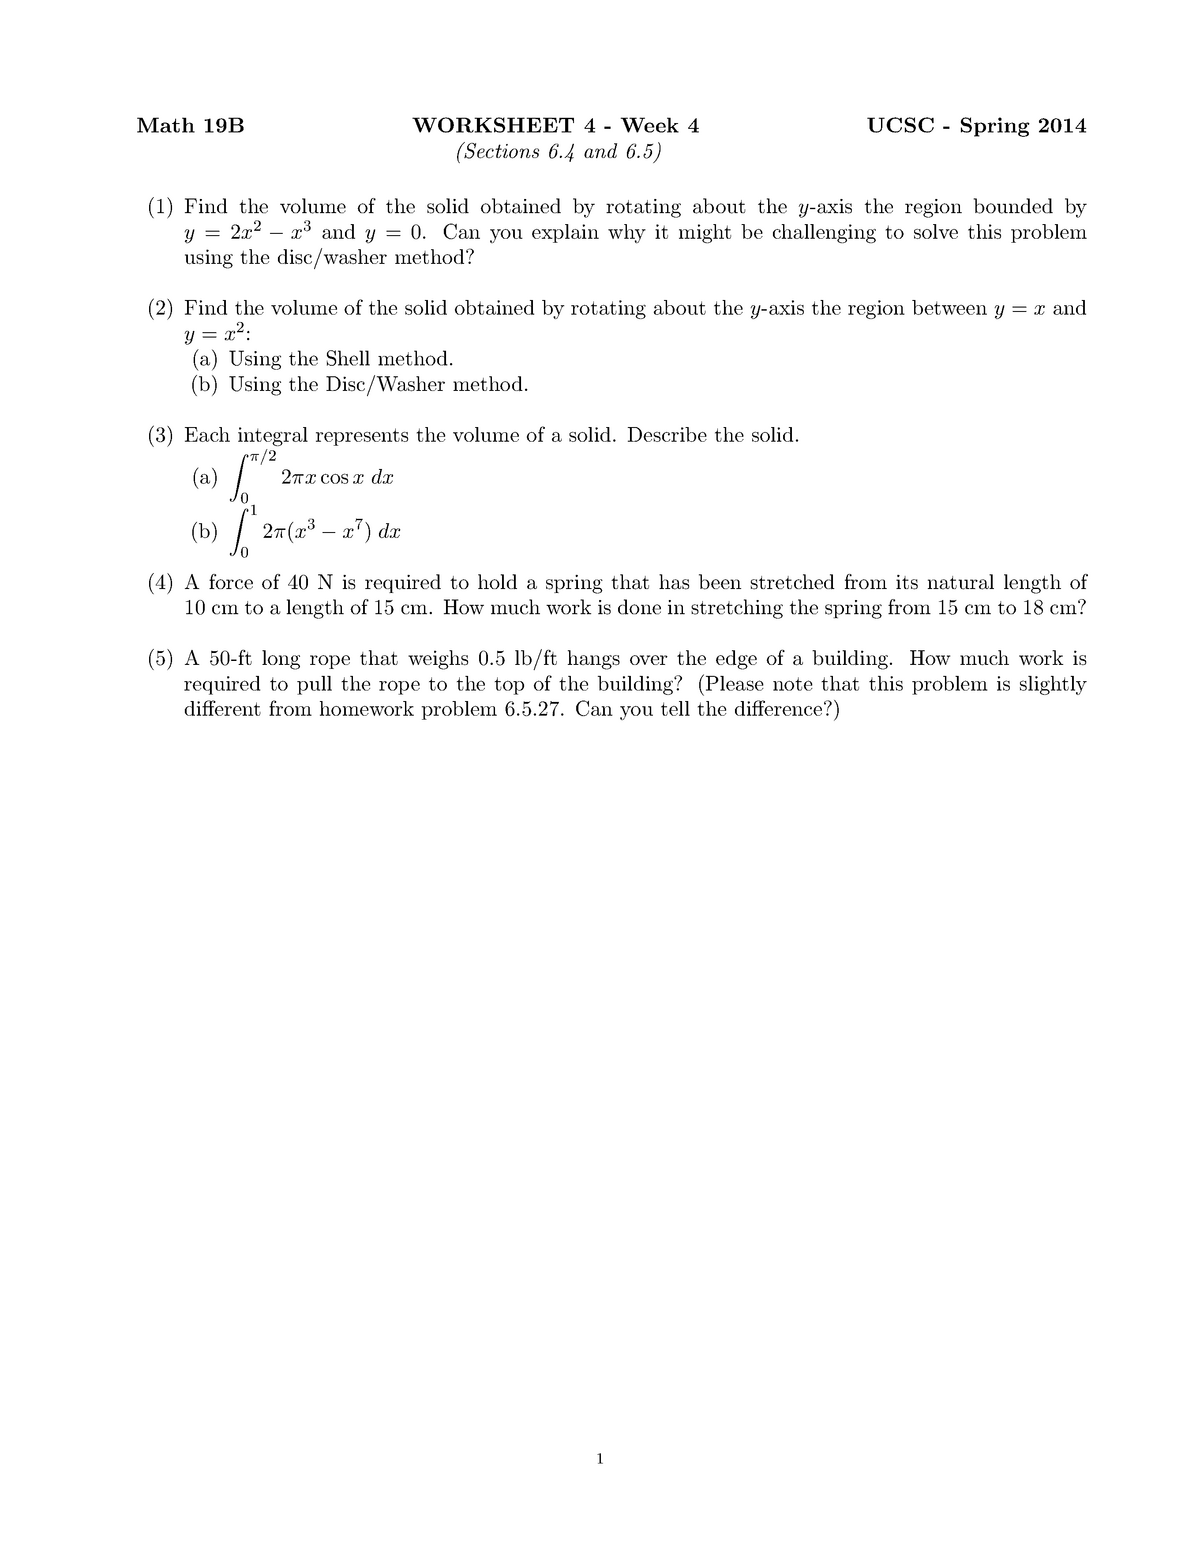 worksheet-4-wk4-math-19b-worksheet-4-week-4-sections-6-and-6-ucsc-spring-2014-1-find-the